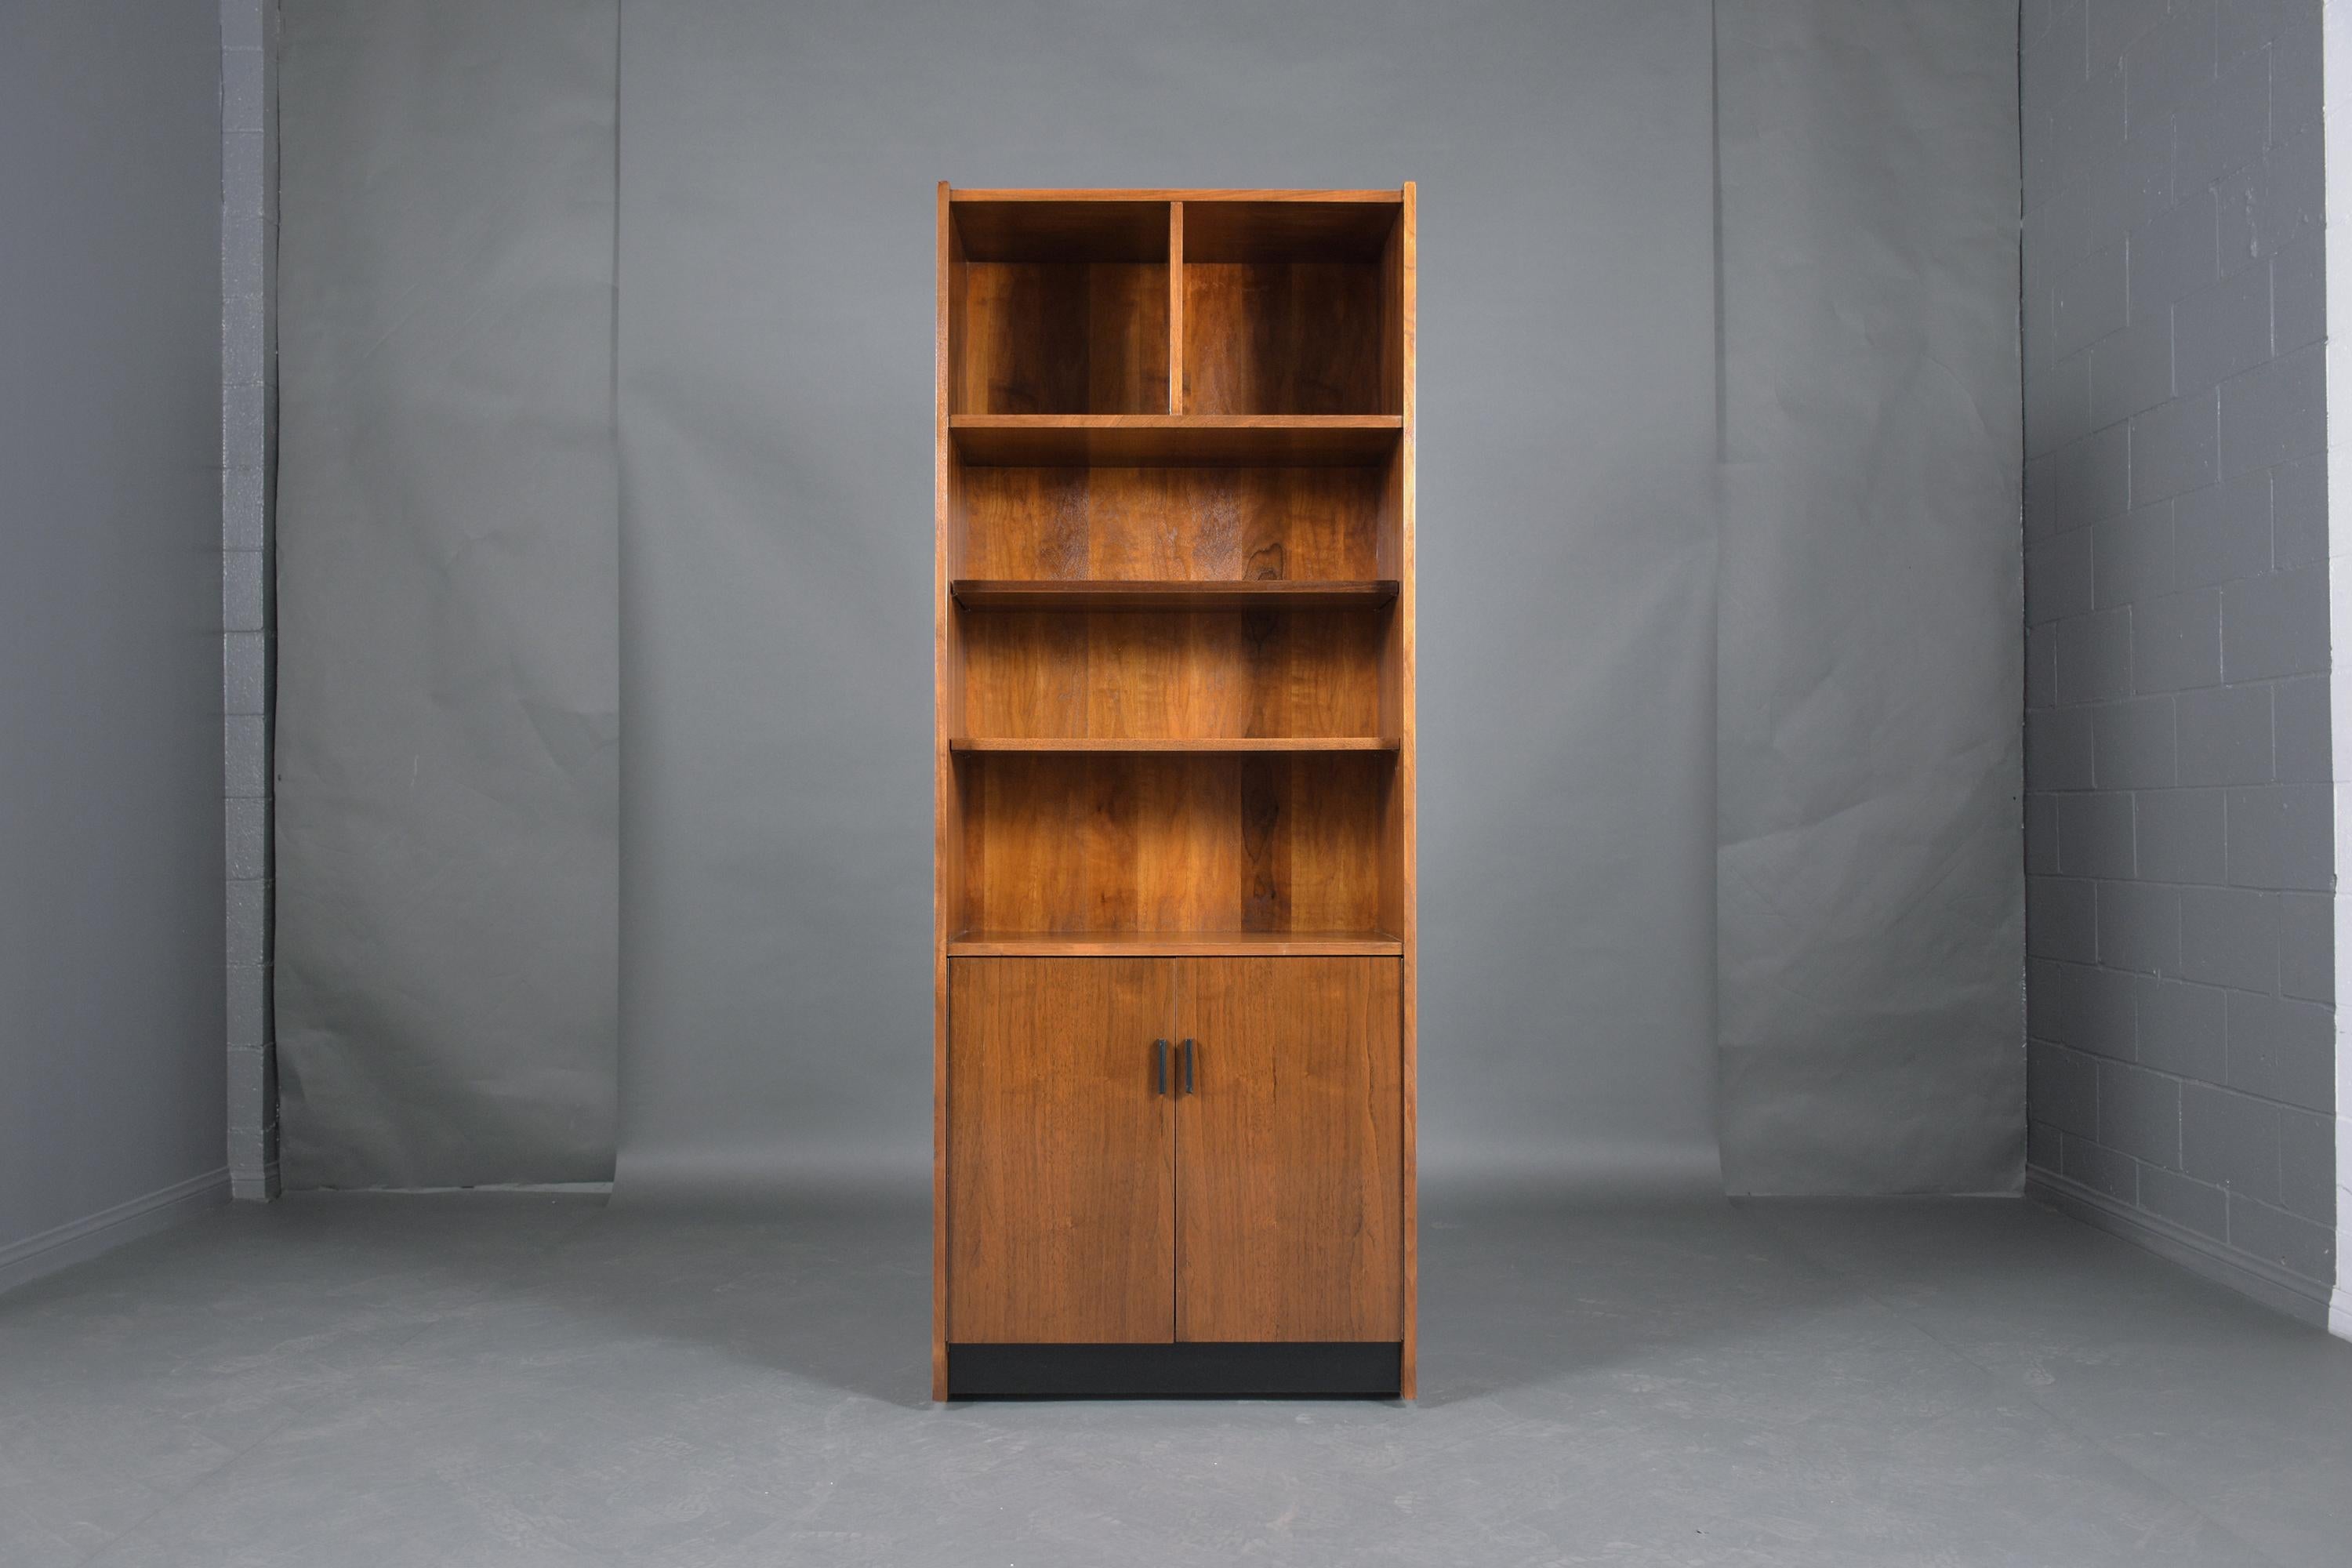 This vintage mid-century modern bookcase is crafted out of walnut wood and has been professionally restored by our team of in-house craftsmen. This wall unit features two cubbies and two open shelves on the top half and the bottom comes with two